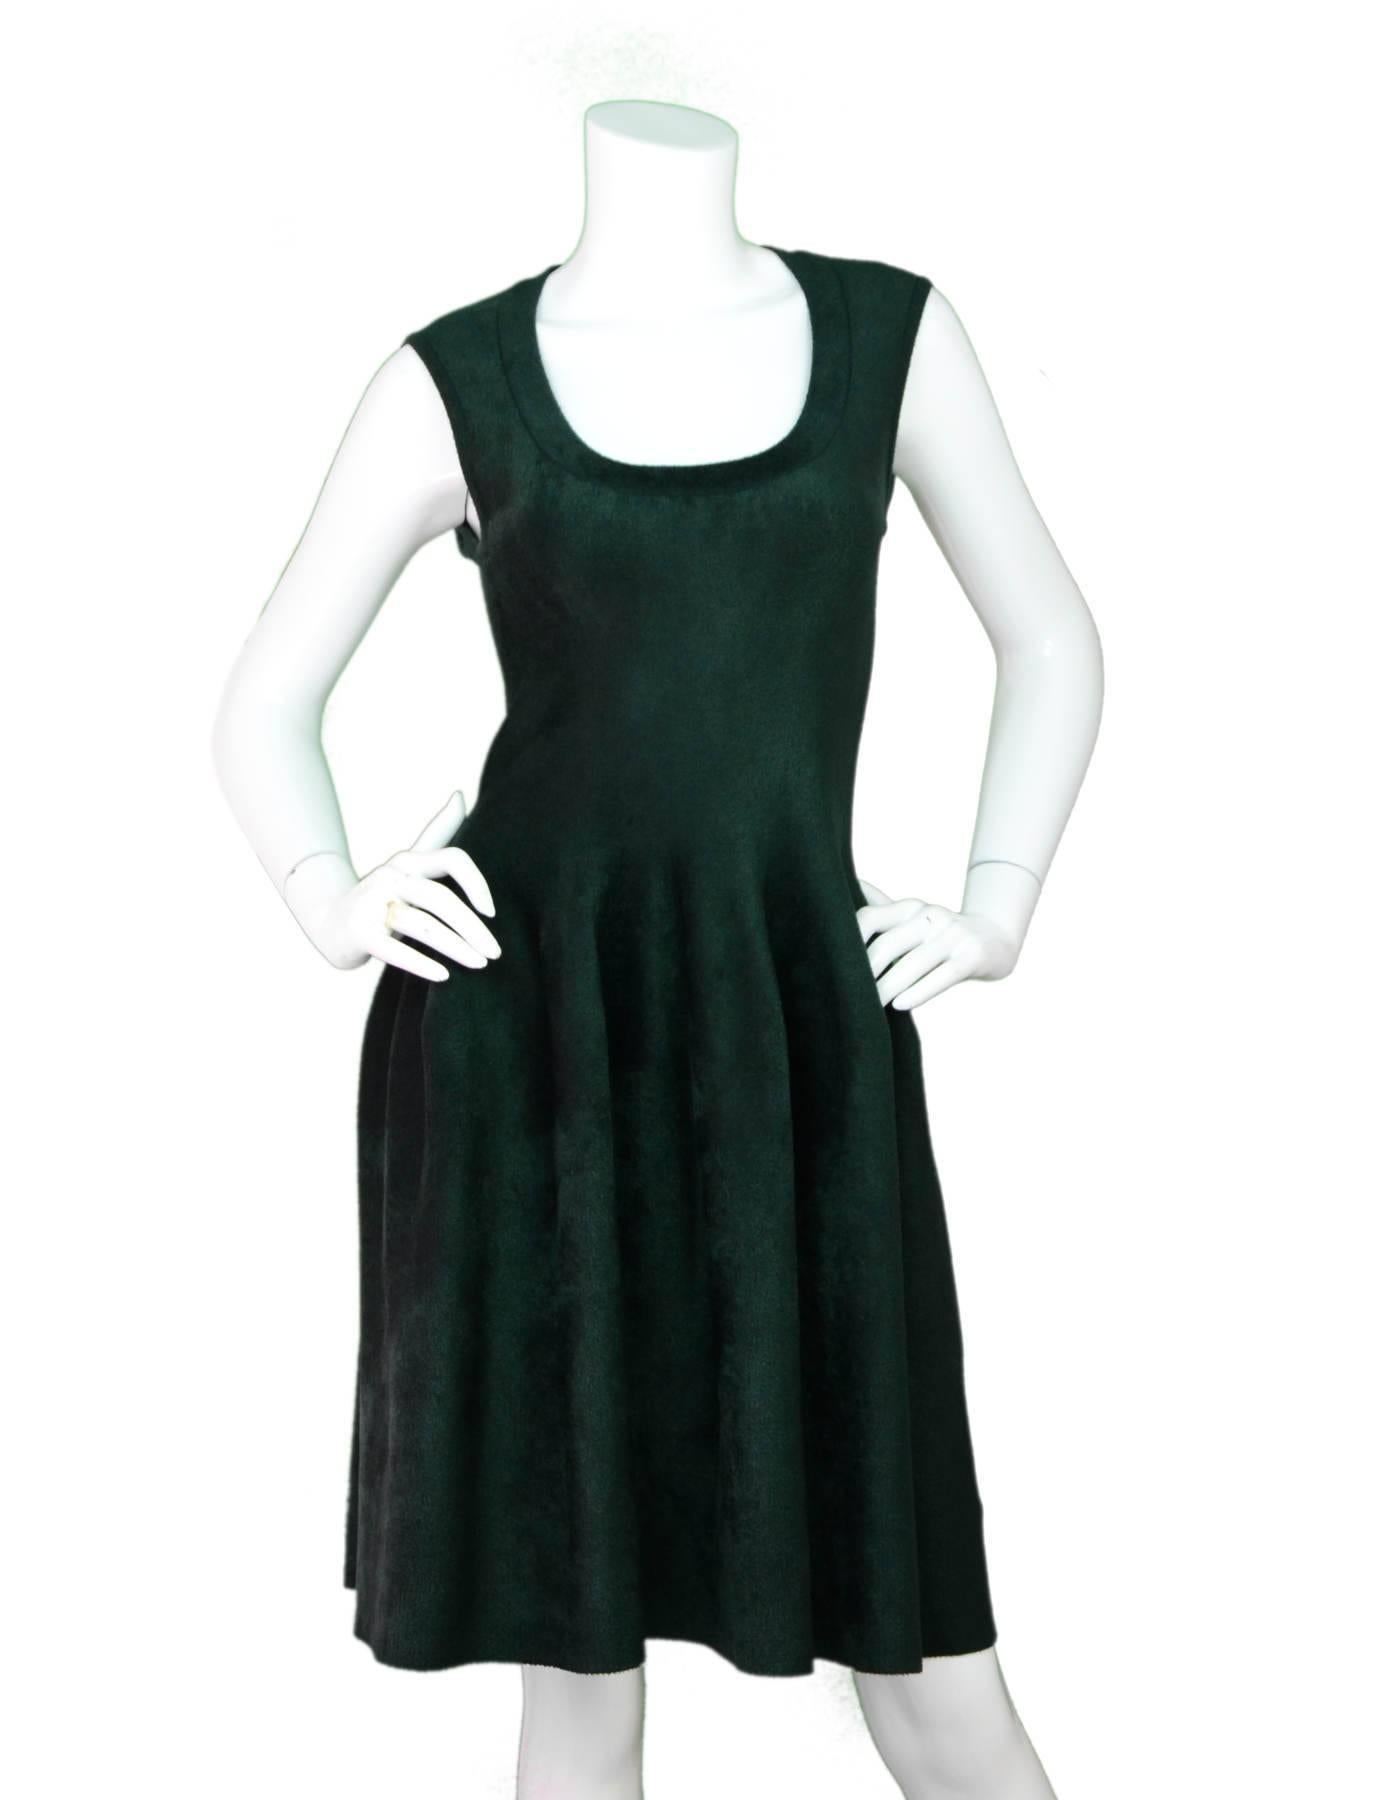 Alaia Green Velvet Fit & Flare Dress Sz FR40

Made in: Italy
Color: Green
Composition: 63% viscose, 37% nylon
Lining: None
Closure/Opening: Back center zip up
Exterior Pockets: None
Interior Pockets: None
Overall Condition: Excellent pre-owned